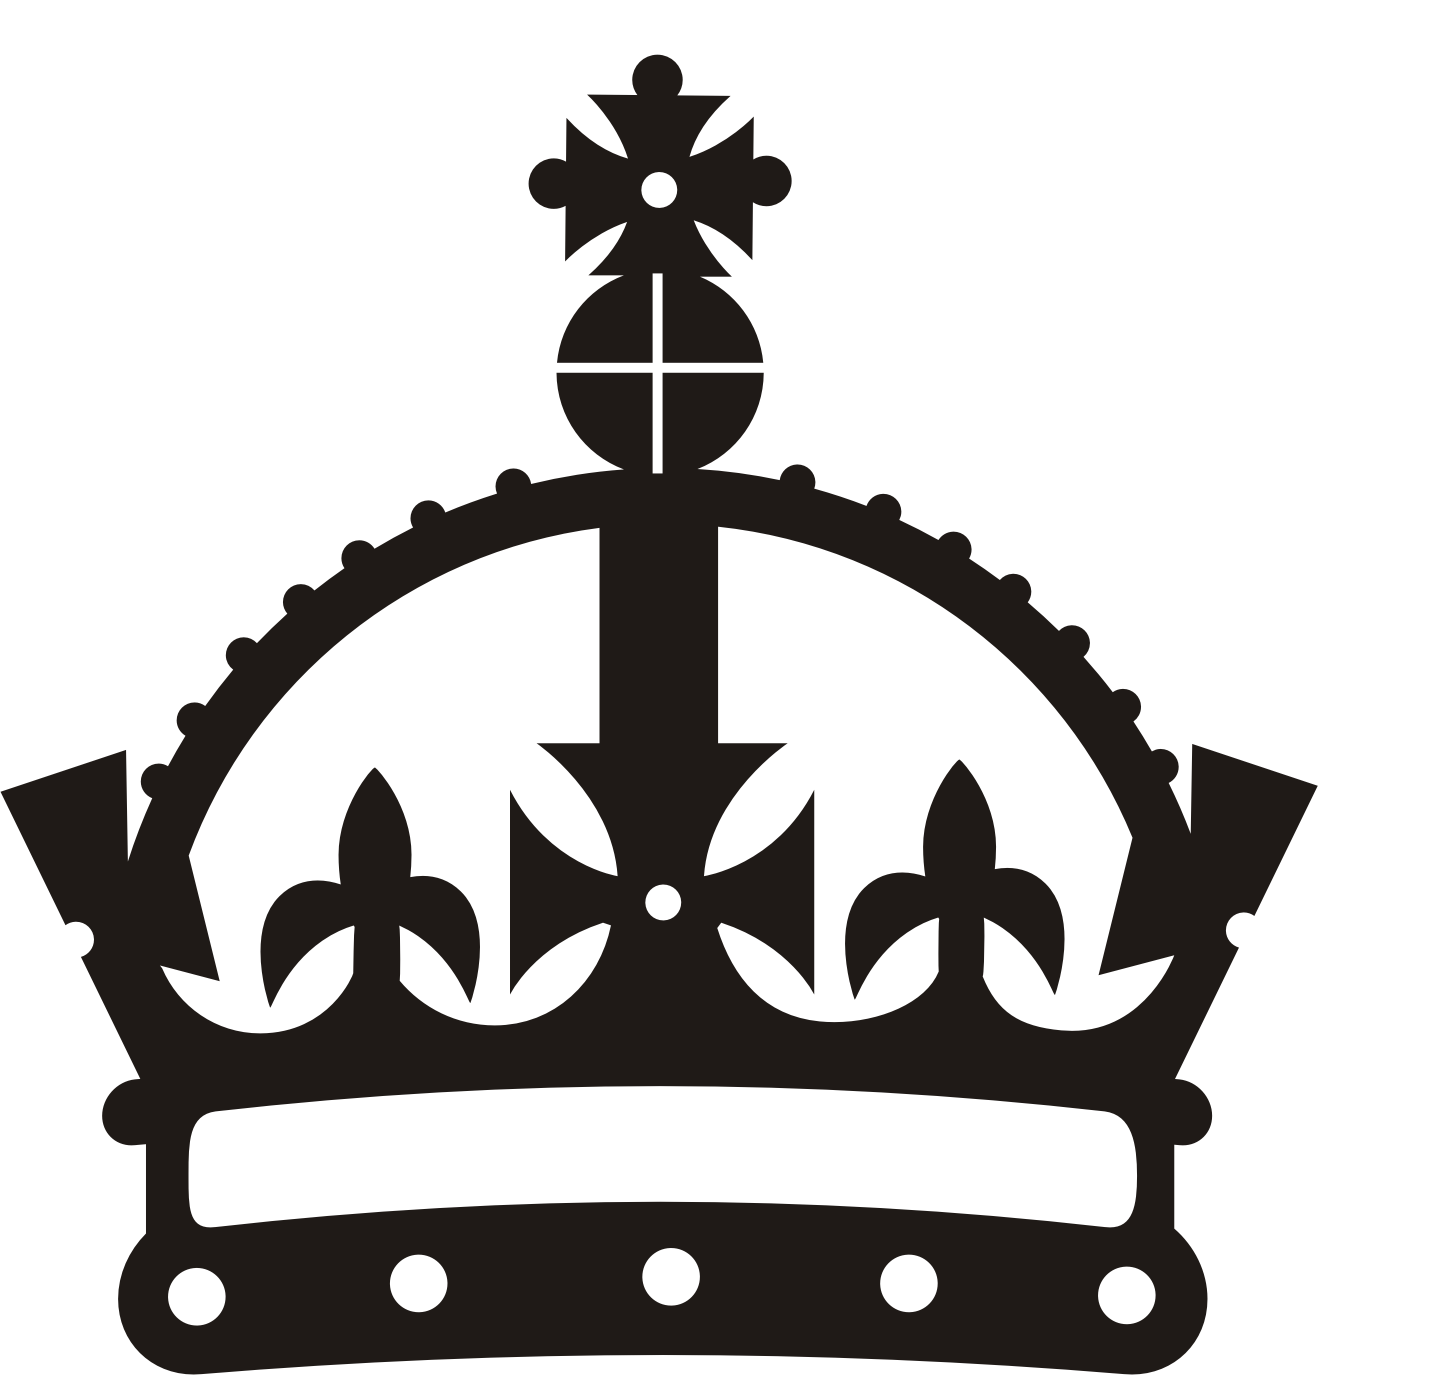 crowns clipart english crown